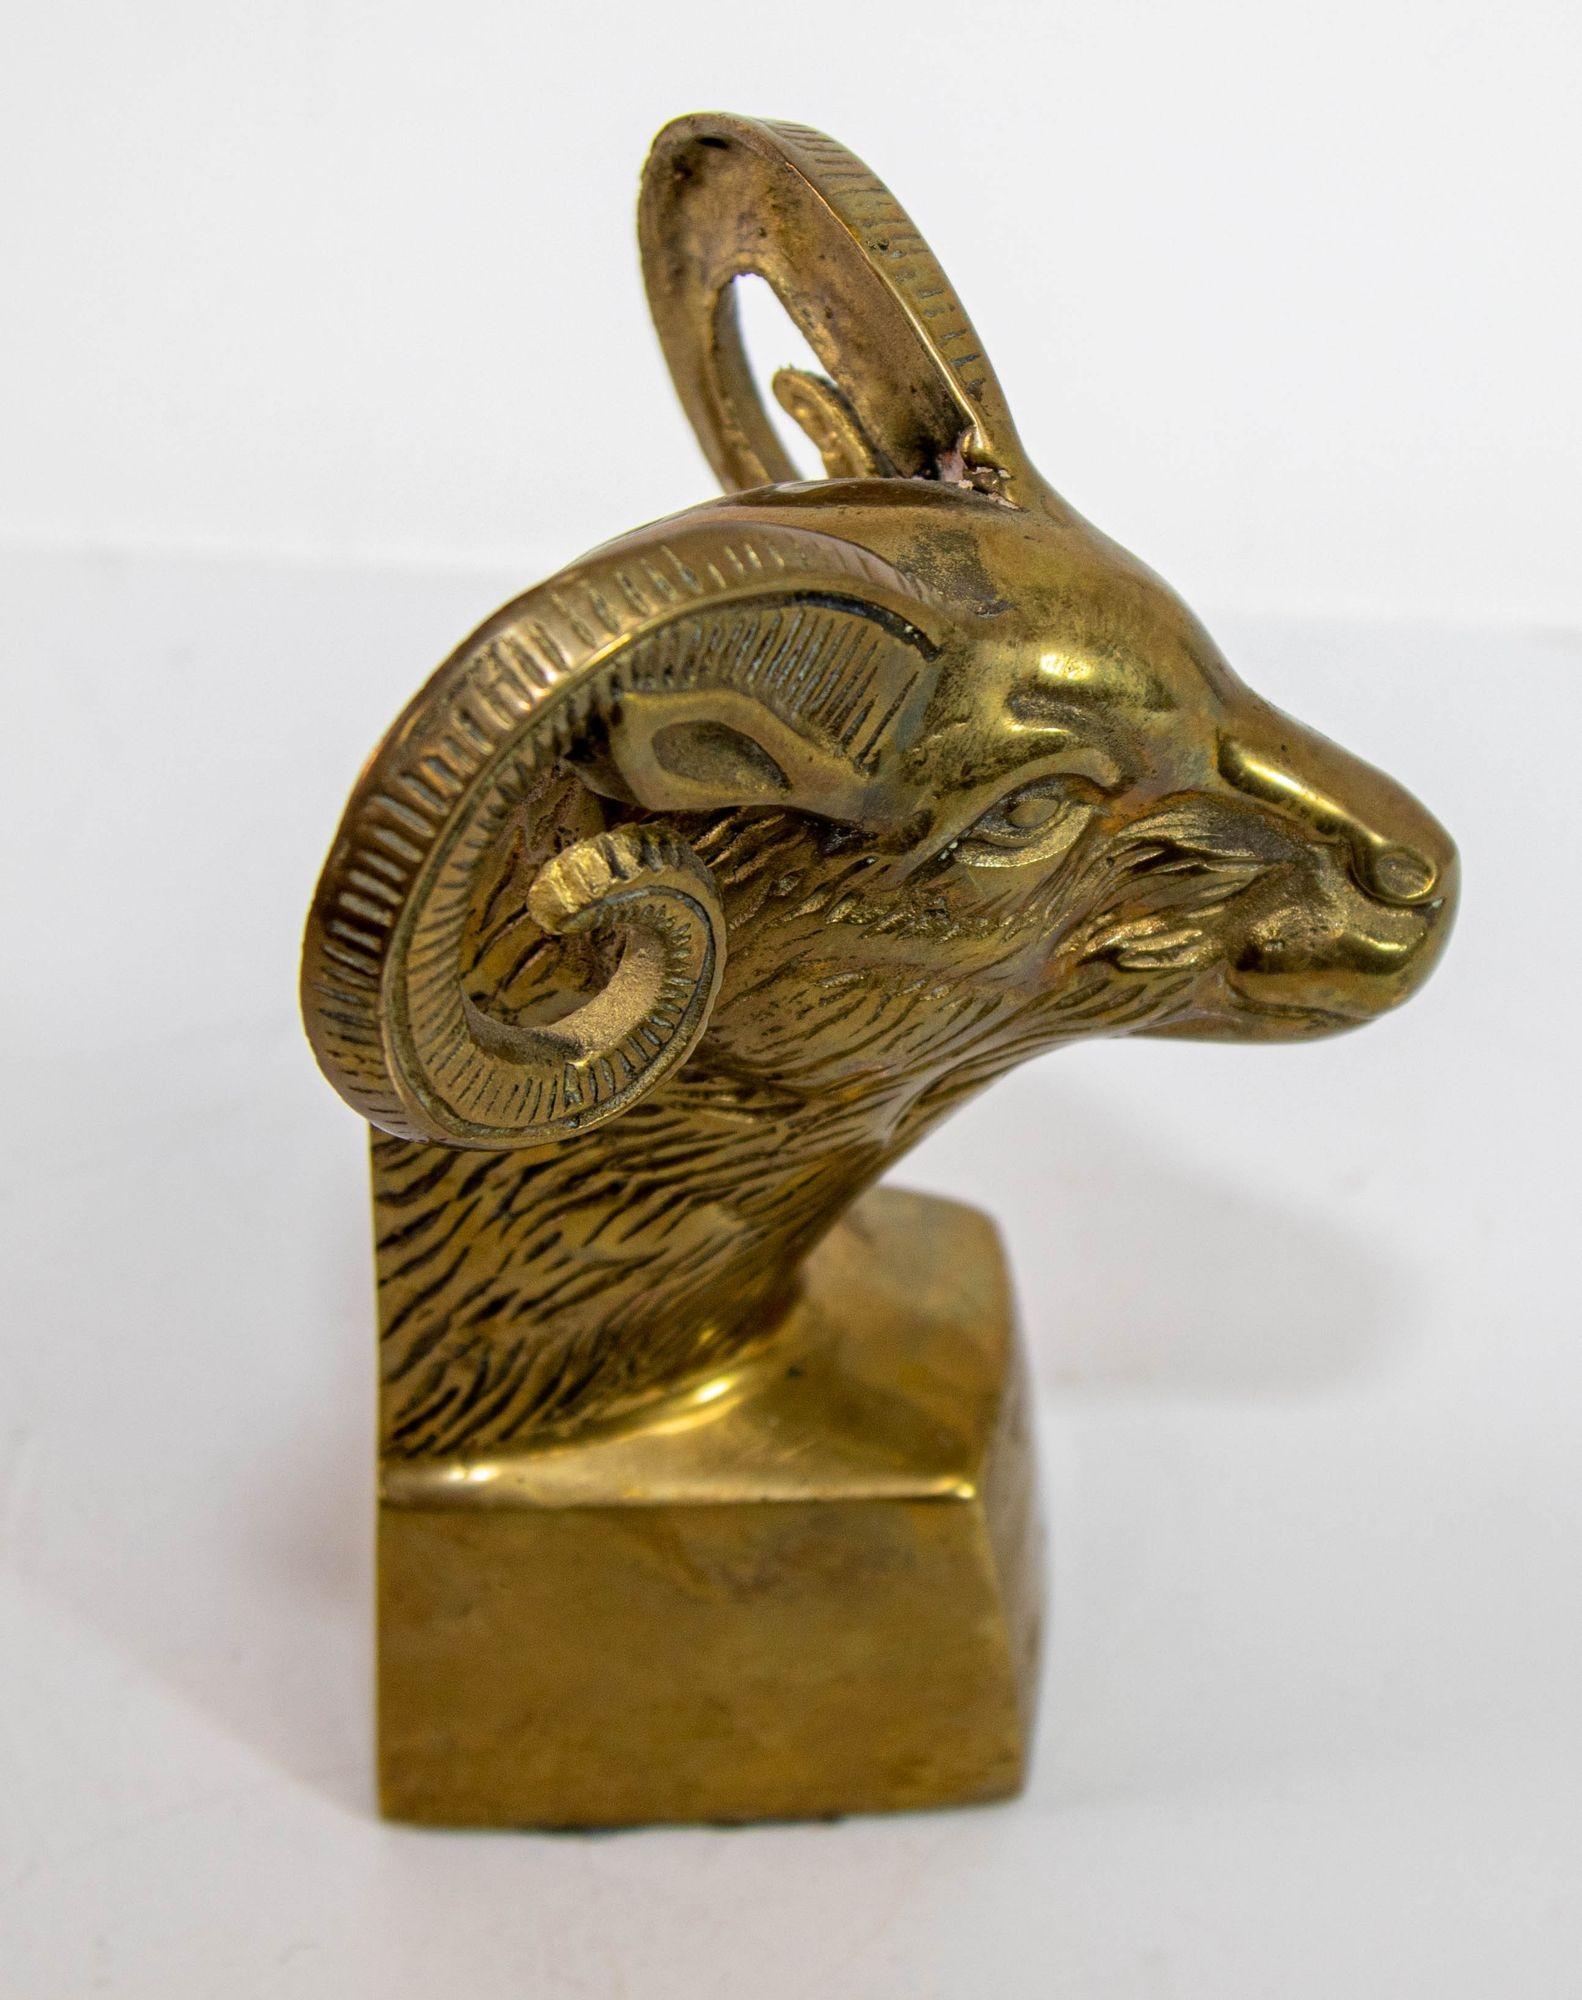 Cast Vintage Brass Ram Paperweight Bookend 1950s Art Deco Style For Sale